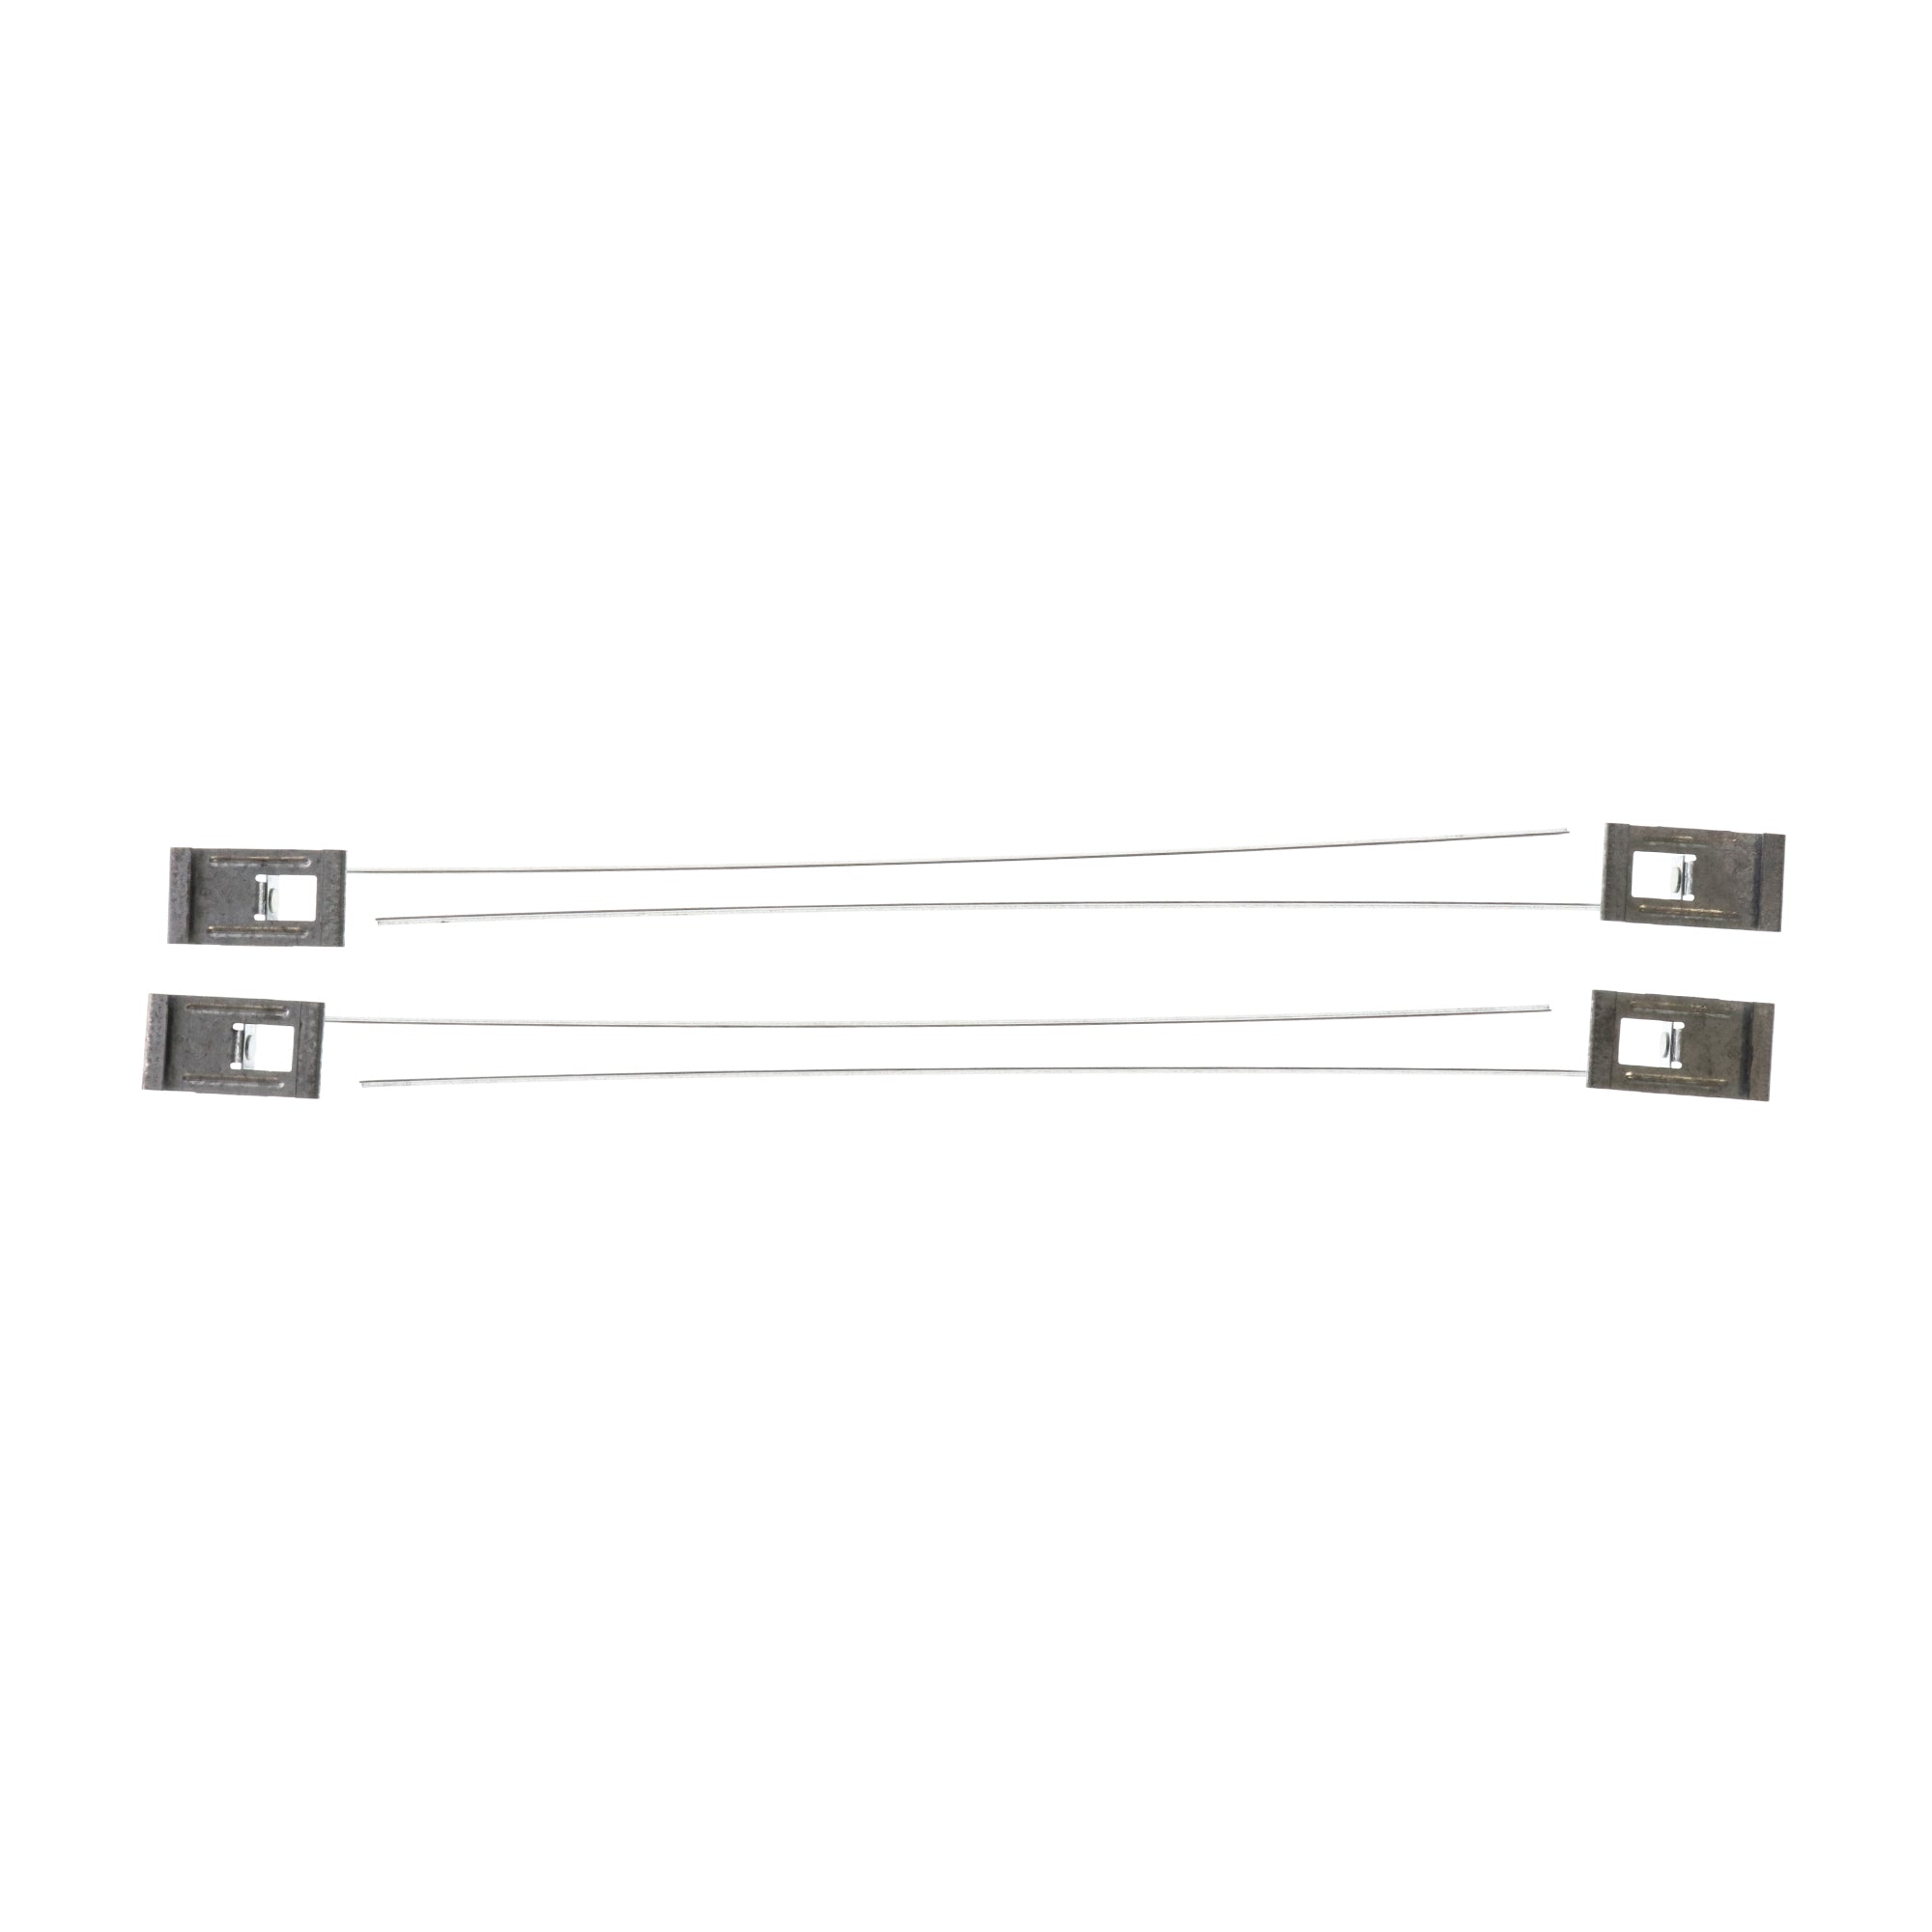 Erico Caddy Cadwal, CADDY ERICO 517FCB HAT CHANNEL LIGHT FIXTURE SUSPENSION BAR, (5-PACK)